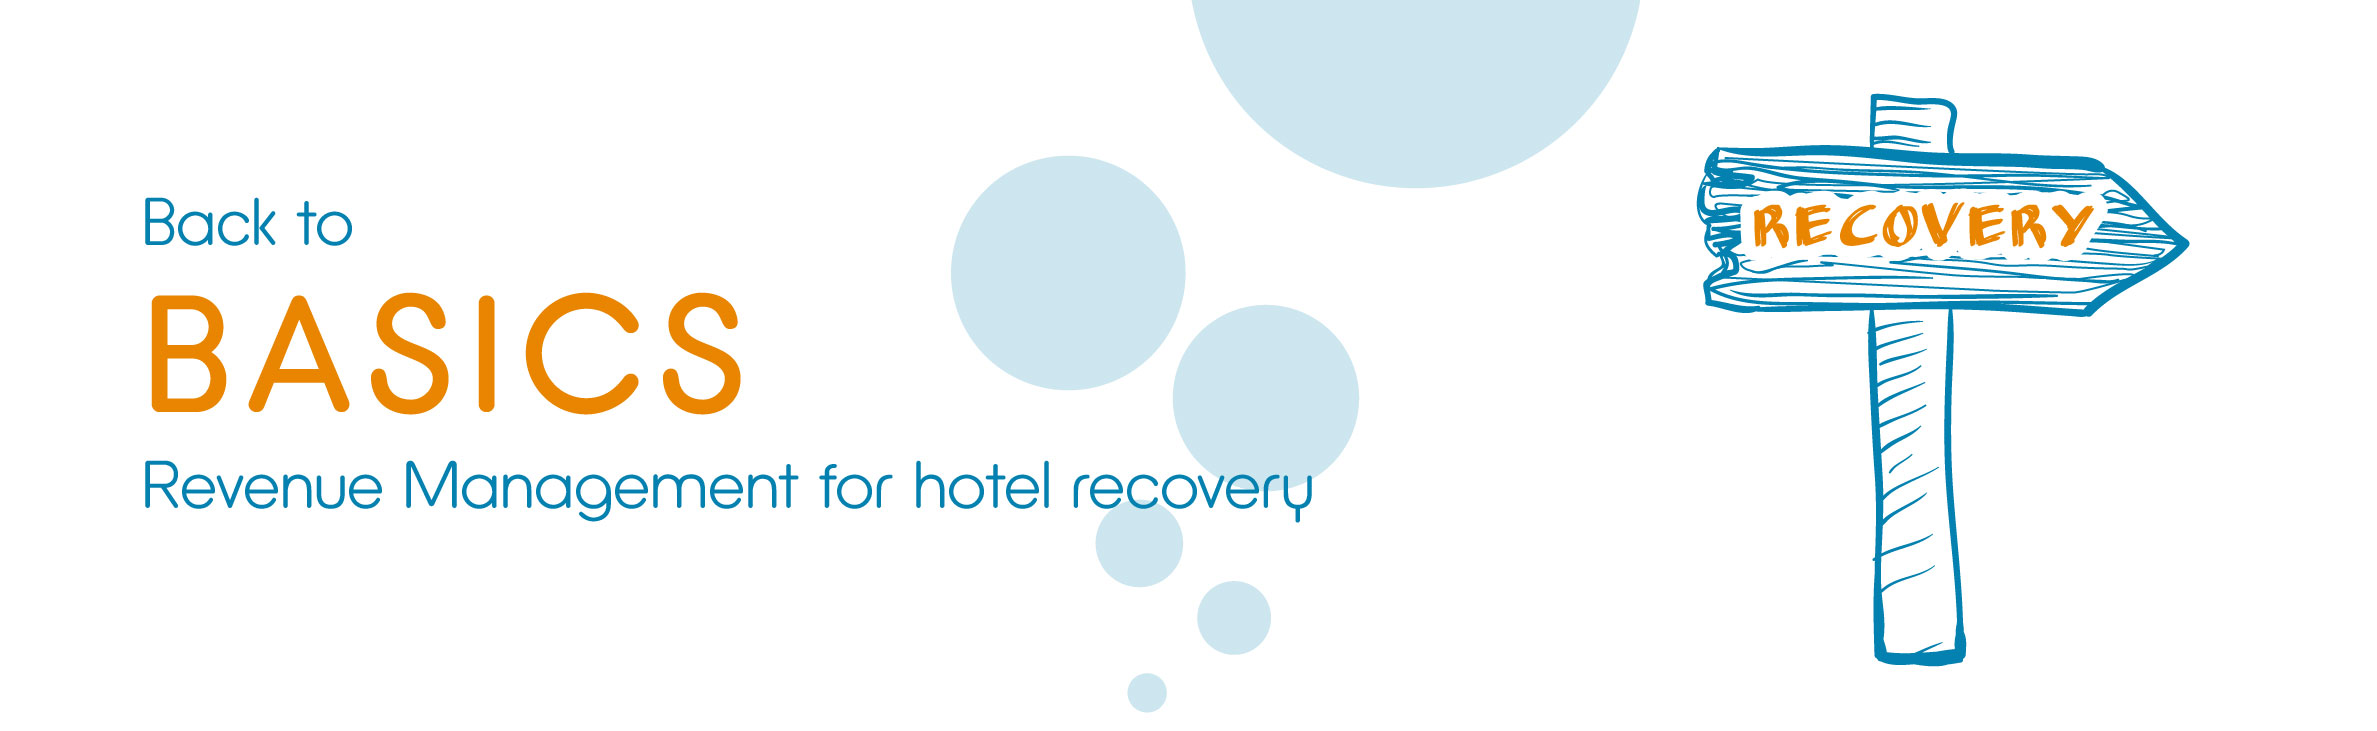 Revenue management strategies: go back to basics for your hotel recovery plan